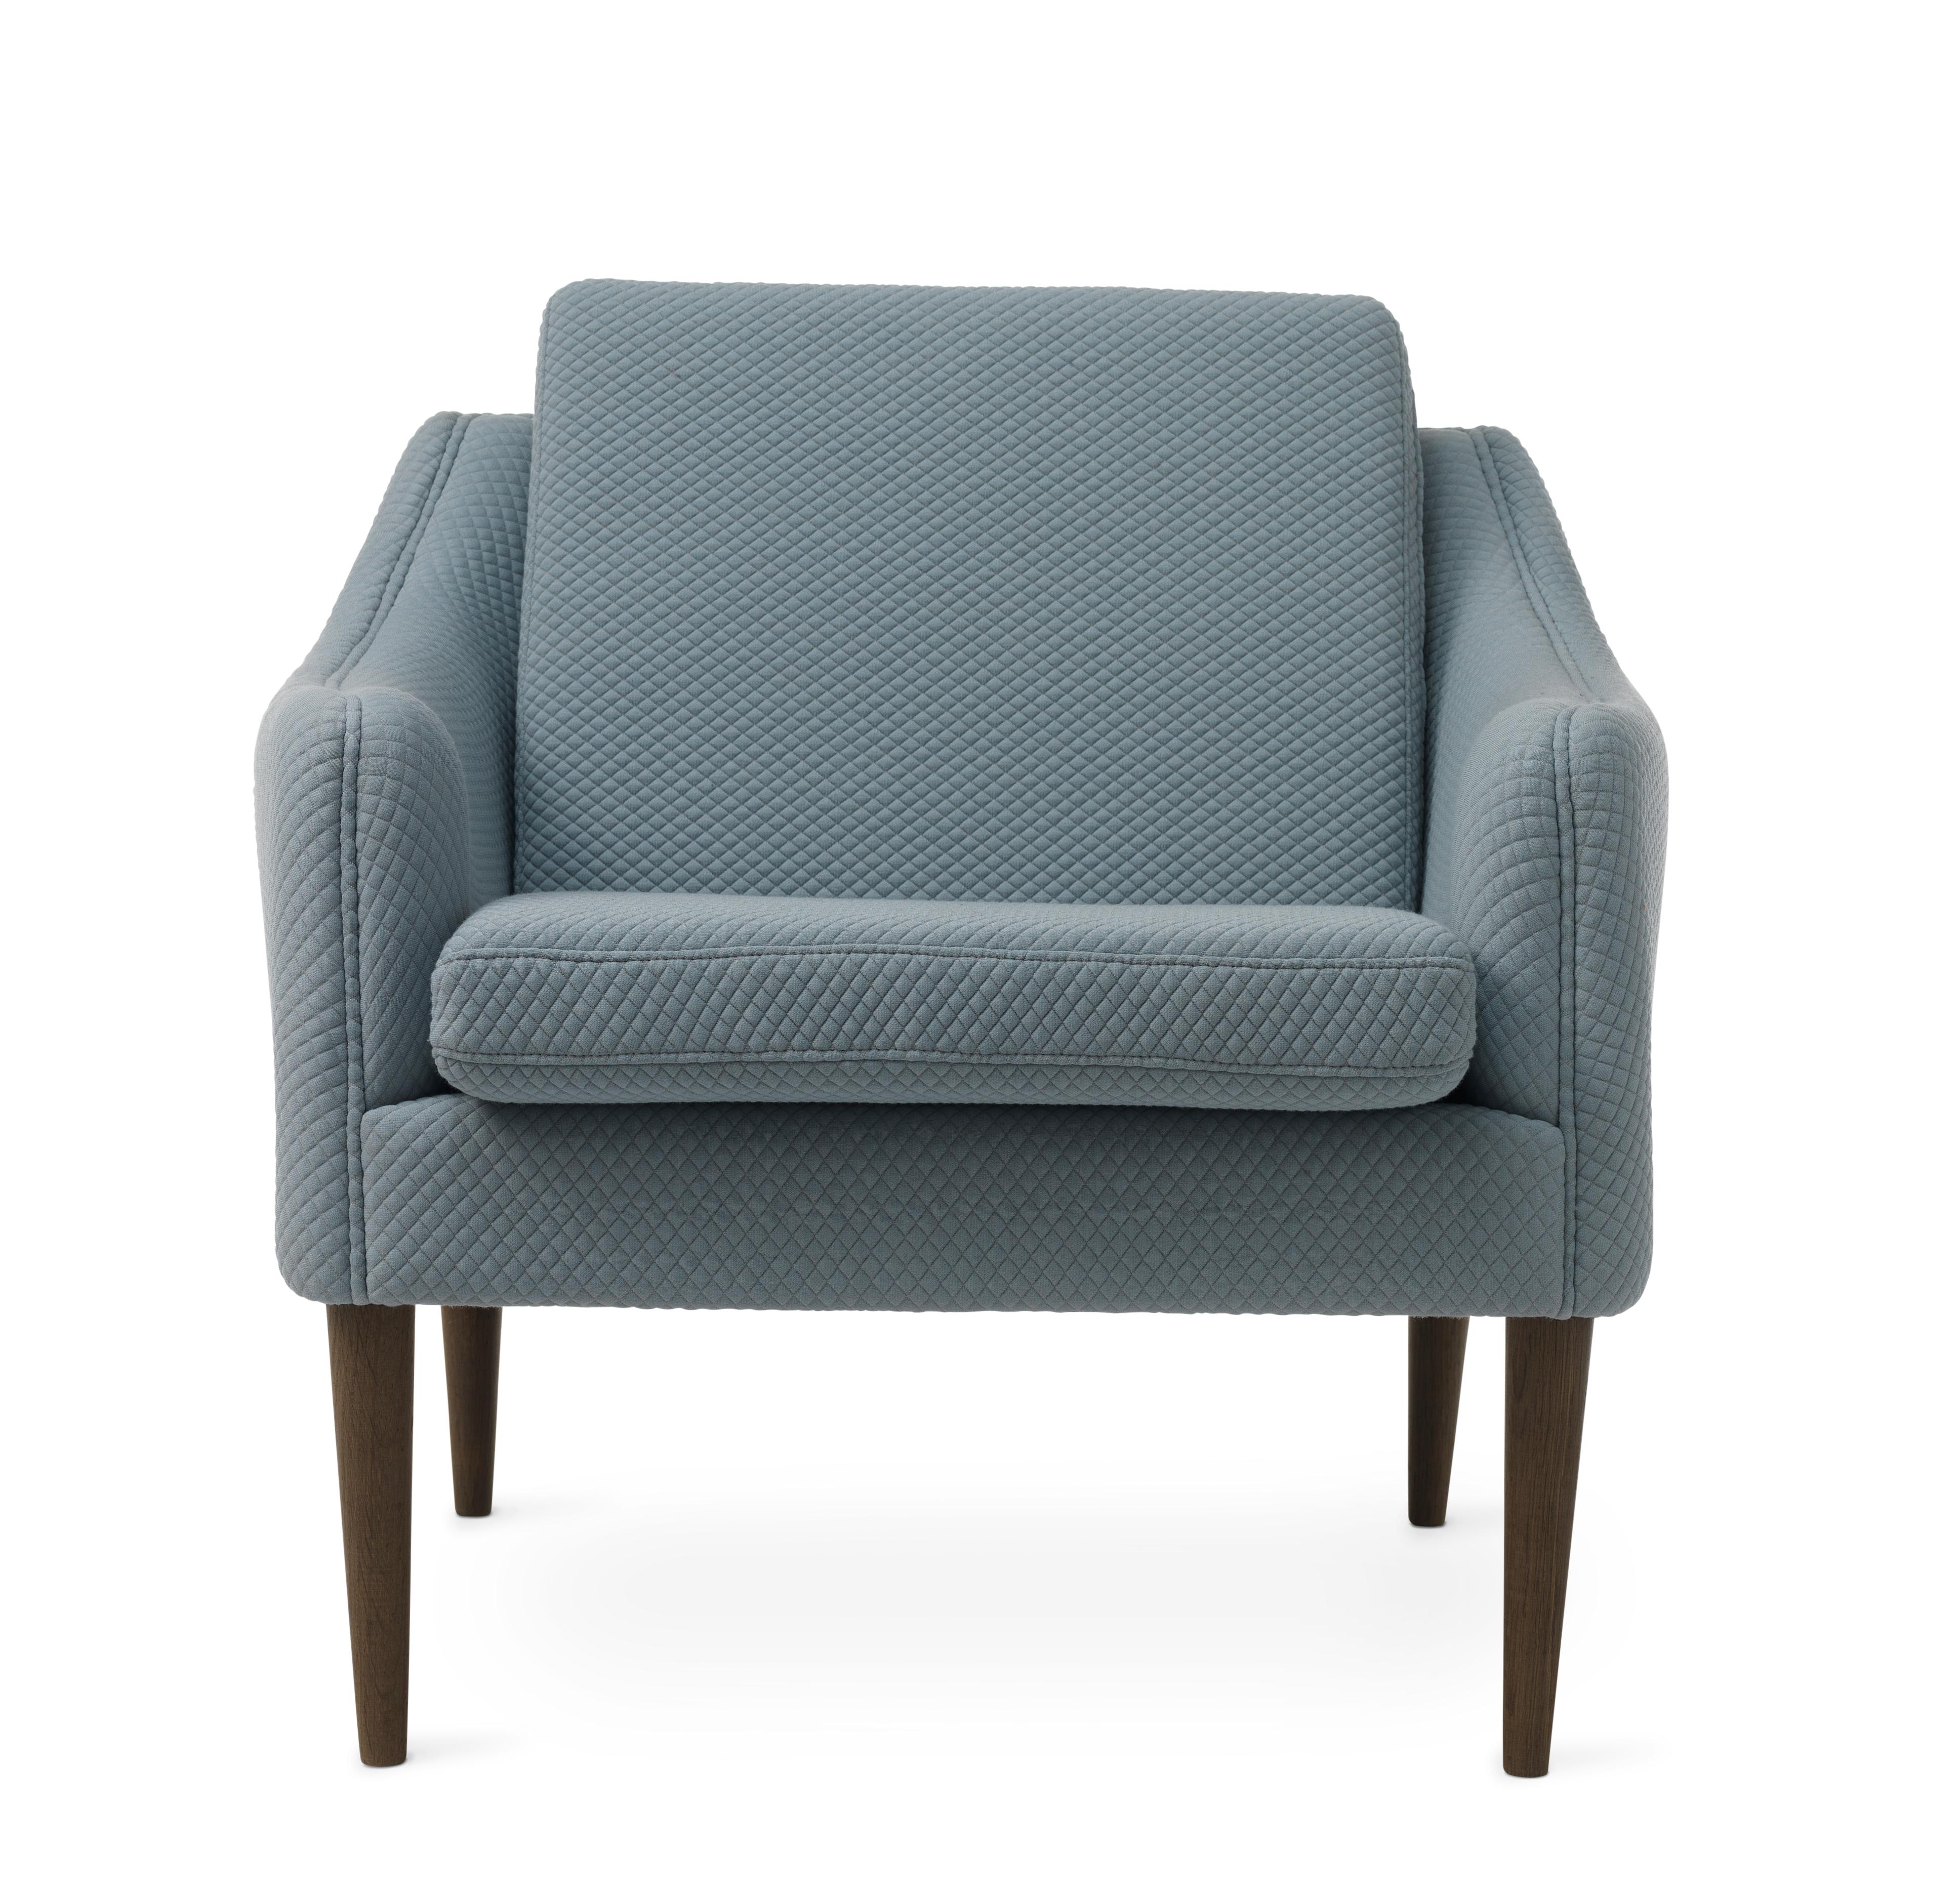 For Sale: Blue (Mosaic 722) Mr. Olsen Lounge Chair with Smoked Oak Legs, by Hans Olsen from Warm Nordic